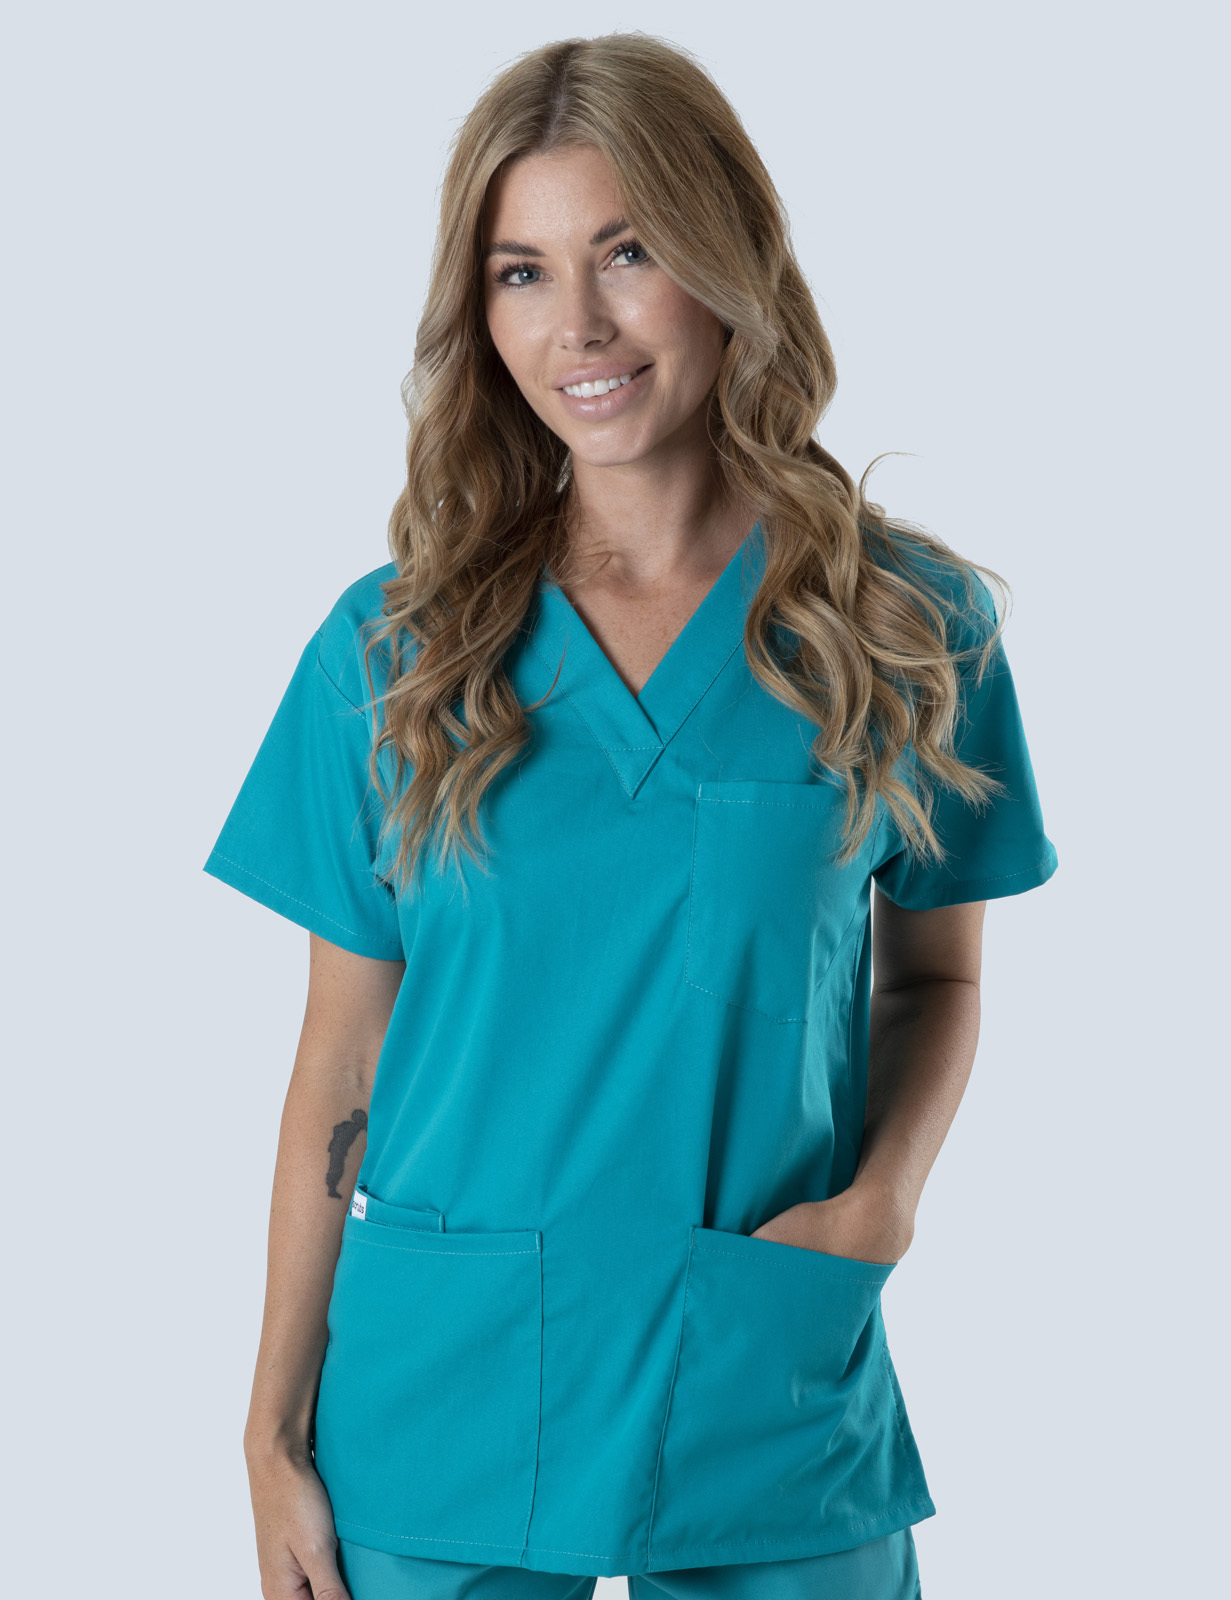 Gold Coast University Hospital - Cardiology (4 Pocket Scrub Top and Cargo Pants in Teal incl Logos)